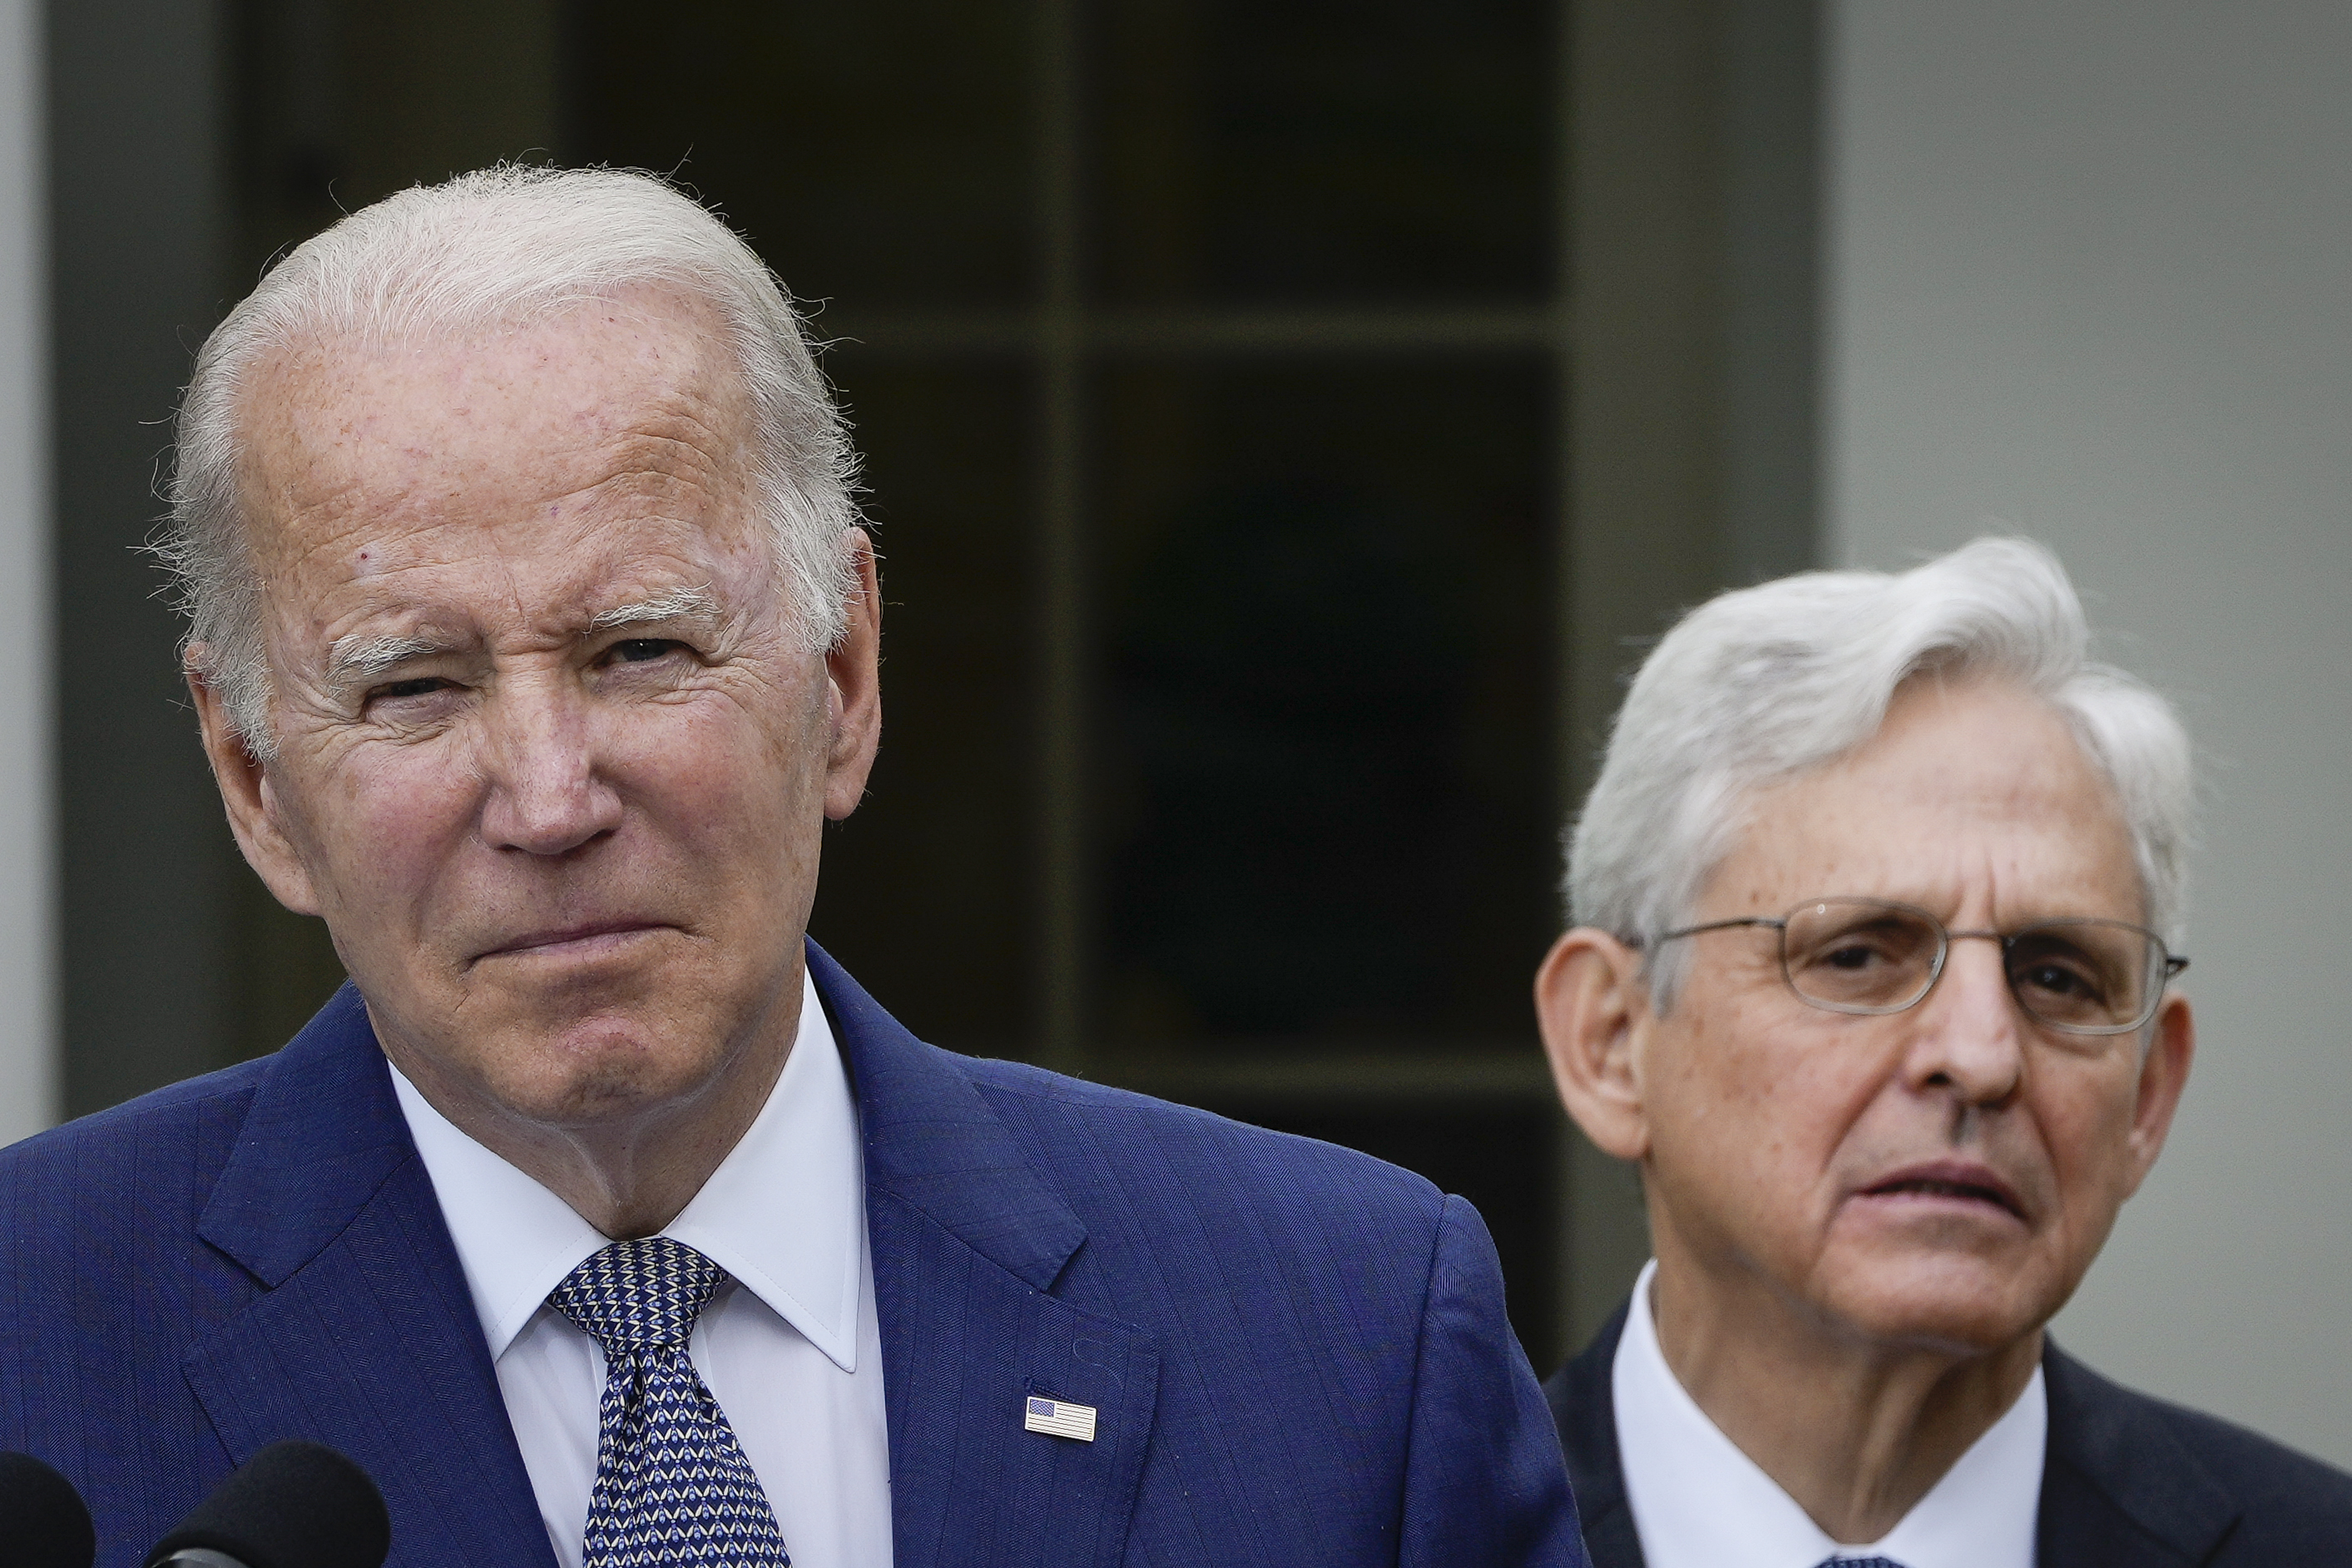 Special counsel to investigate Biden